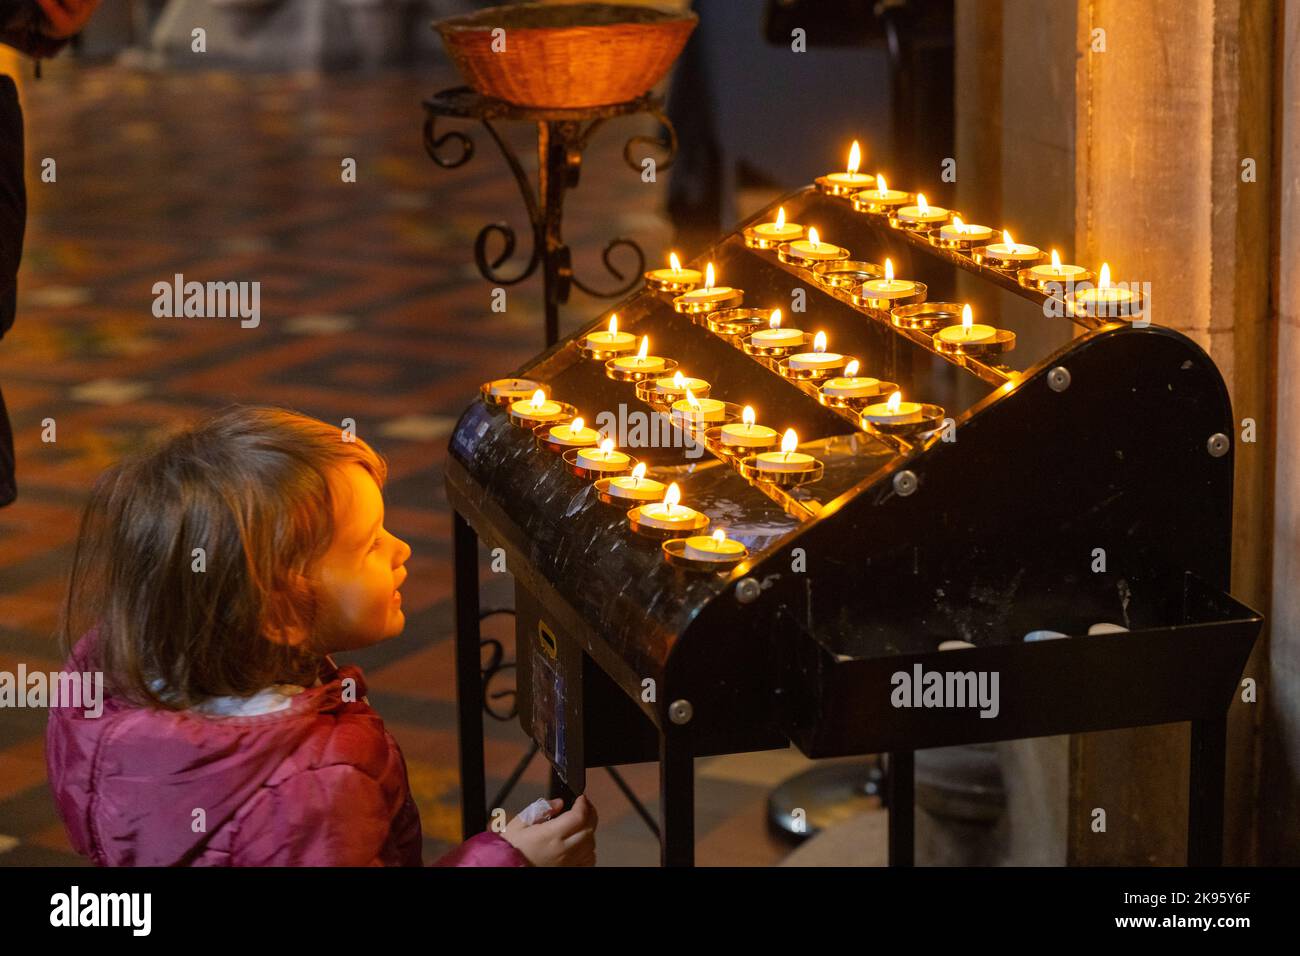 Ireland Dublin St Patrick's Cathedral Church of Ireland was Catholic founded 1191 Gothic young child toddler fascinated devotional candles Stock Photo